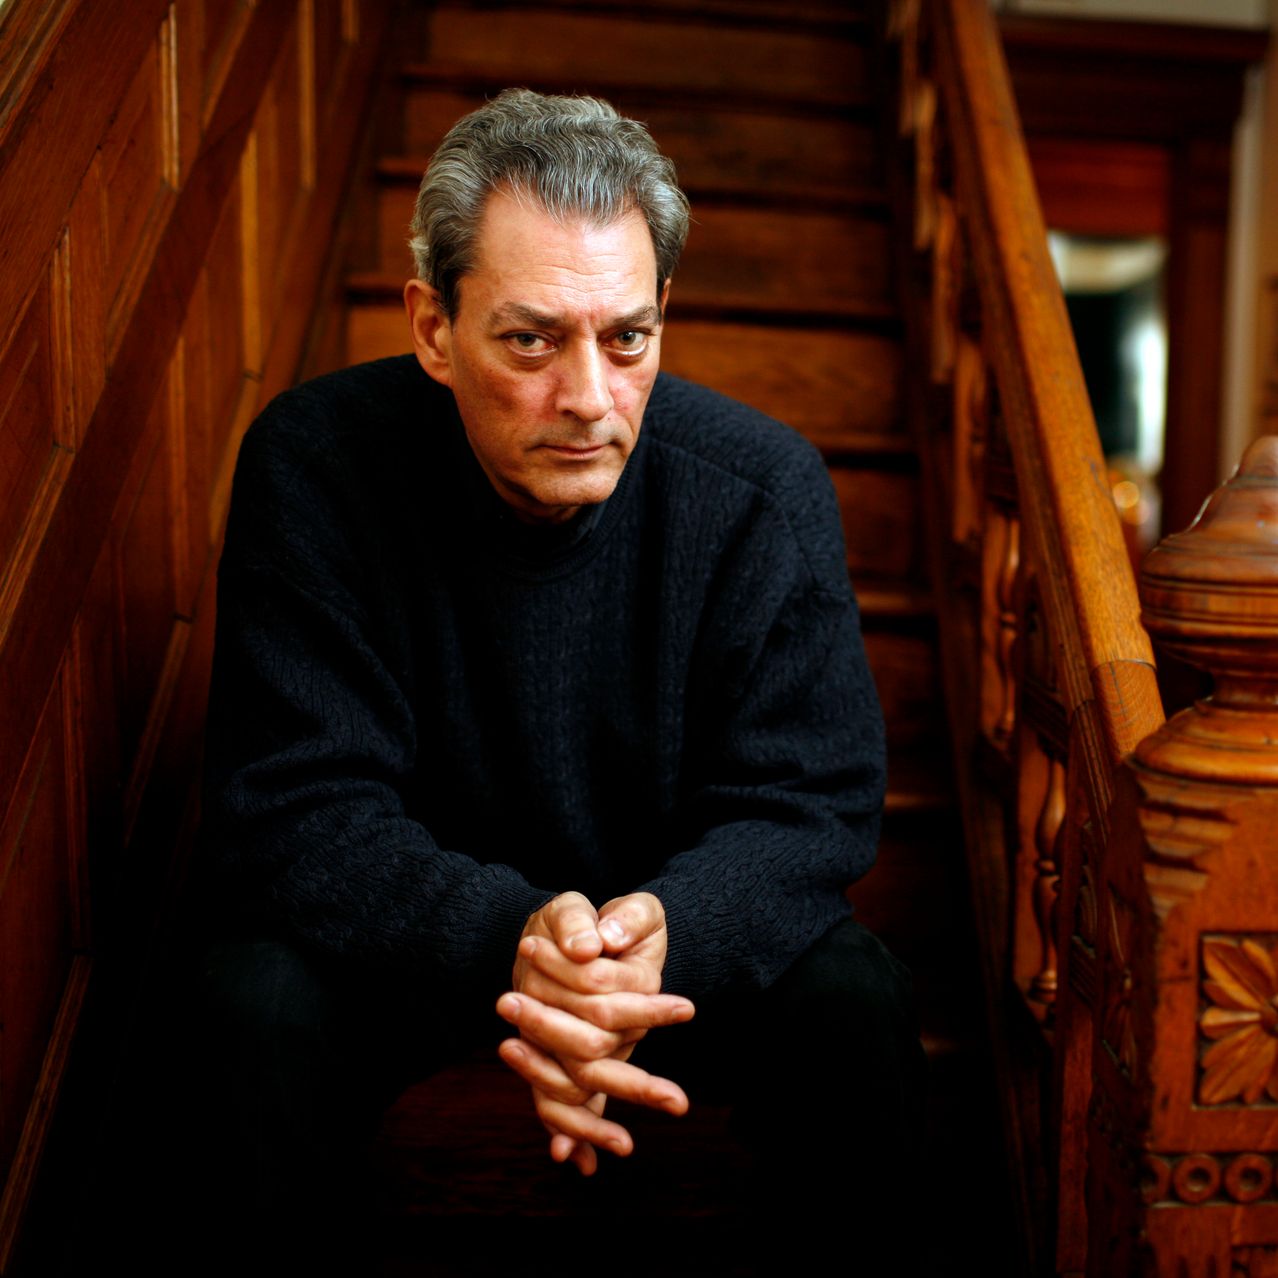 Paul Auster wrote more than 30 books and was shortlisted for the Booker Prize. TIMOTHY FADEK/CORBIS/ GETTY IMAGES